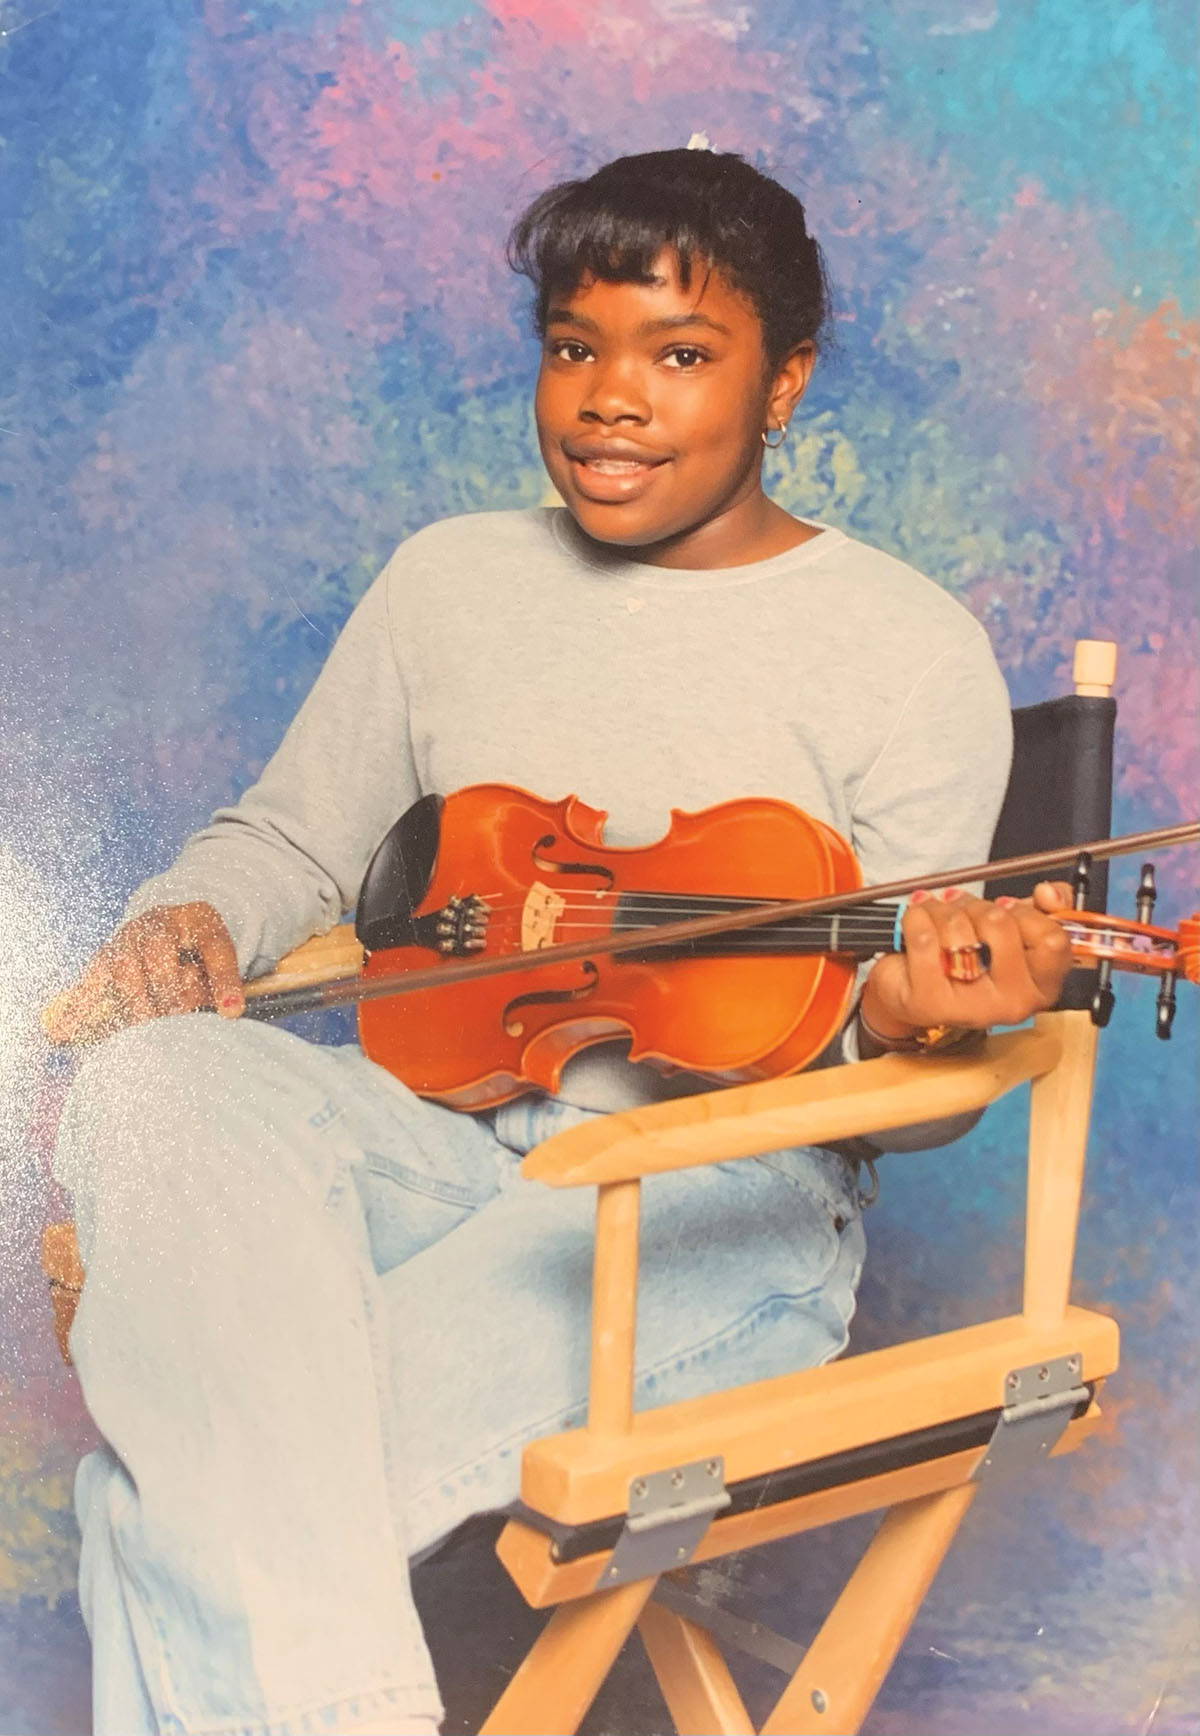 A young woman sits in a chair with a violin on a colorful background